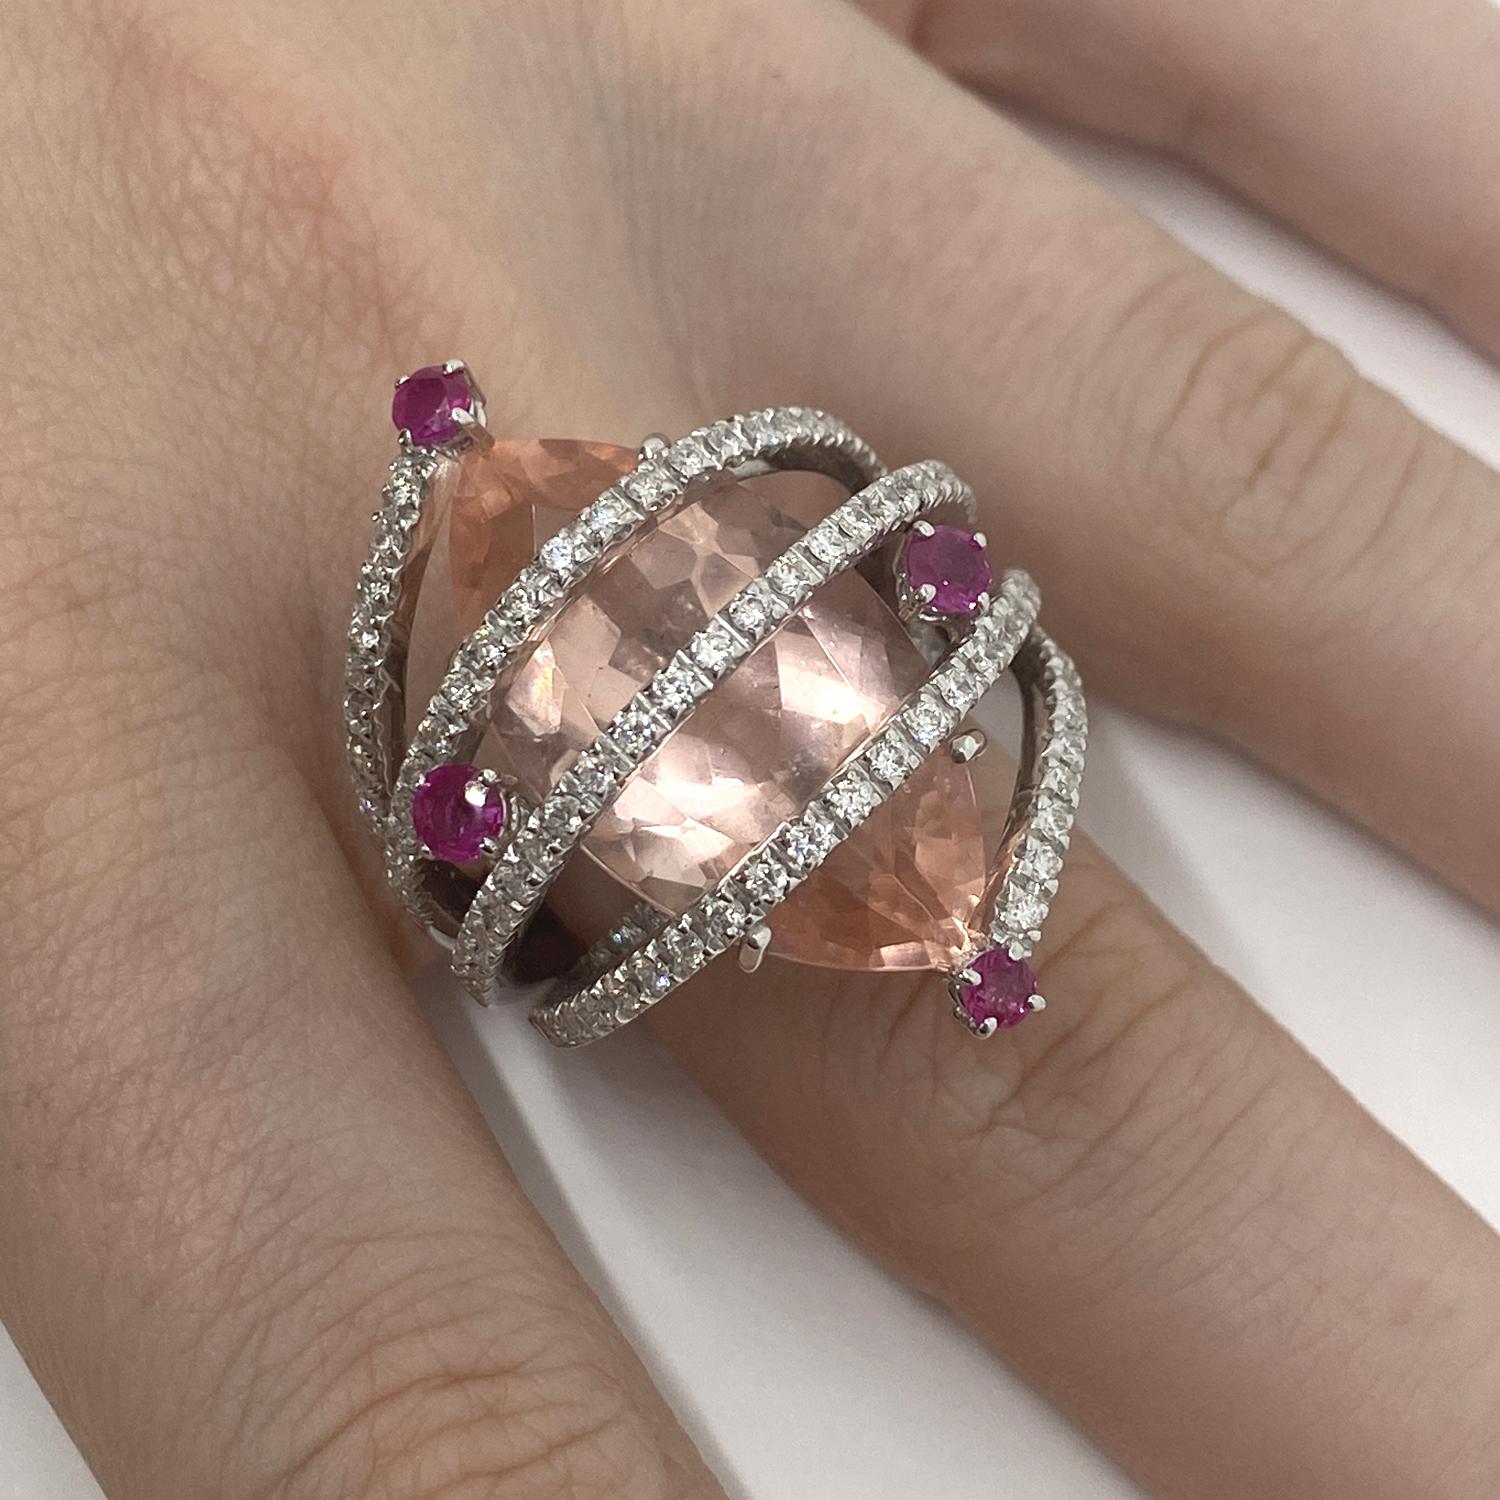 Fratelli Staurino signed ring made of 18kt white gold with natural brilliant-cut white diamonds for ct 1.38 and rubies for ct .0.54 and rose quartz navettes for ct .8.40

Welcome to our jewelry collection, where every piece tells a story of timeless